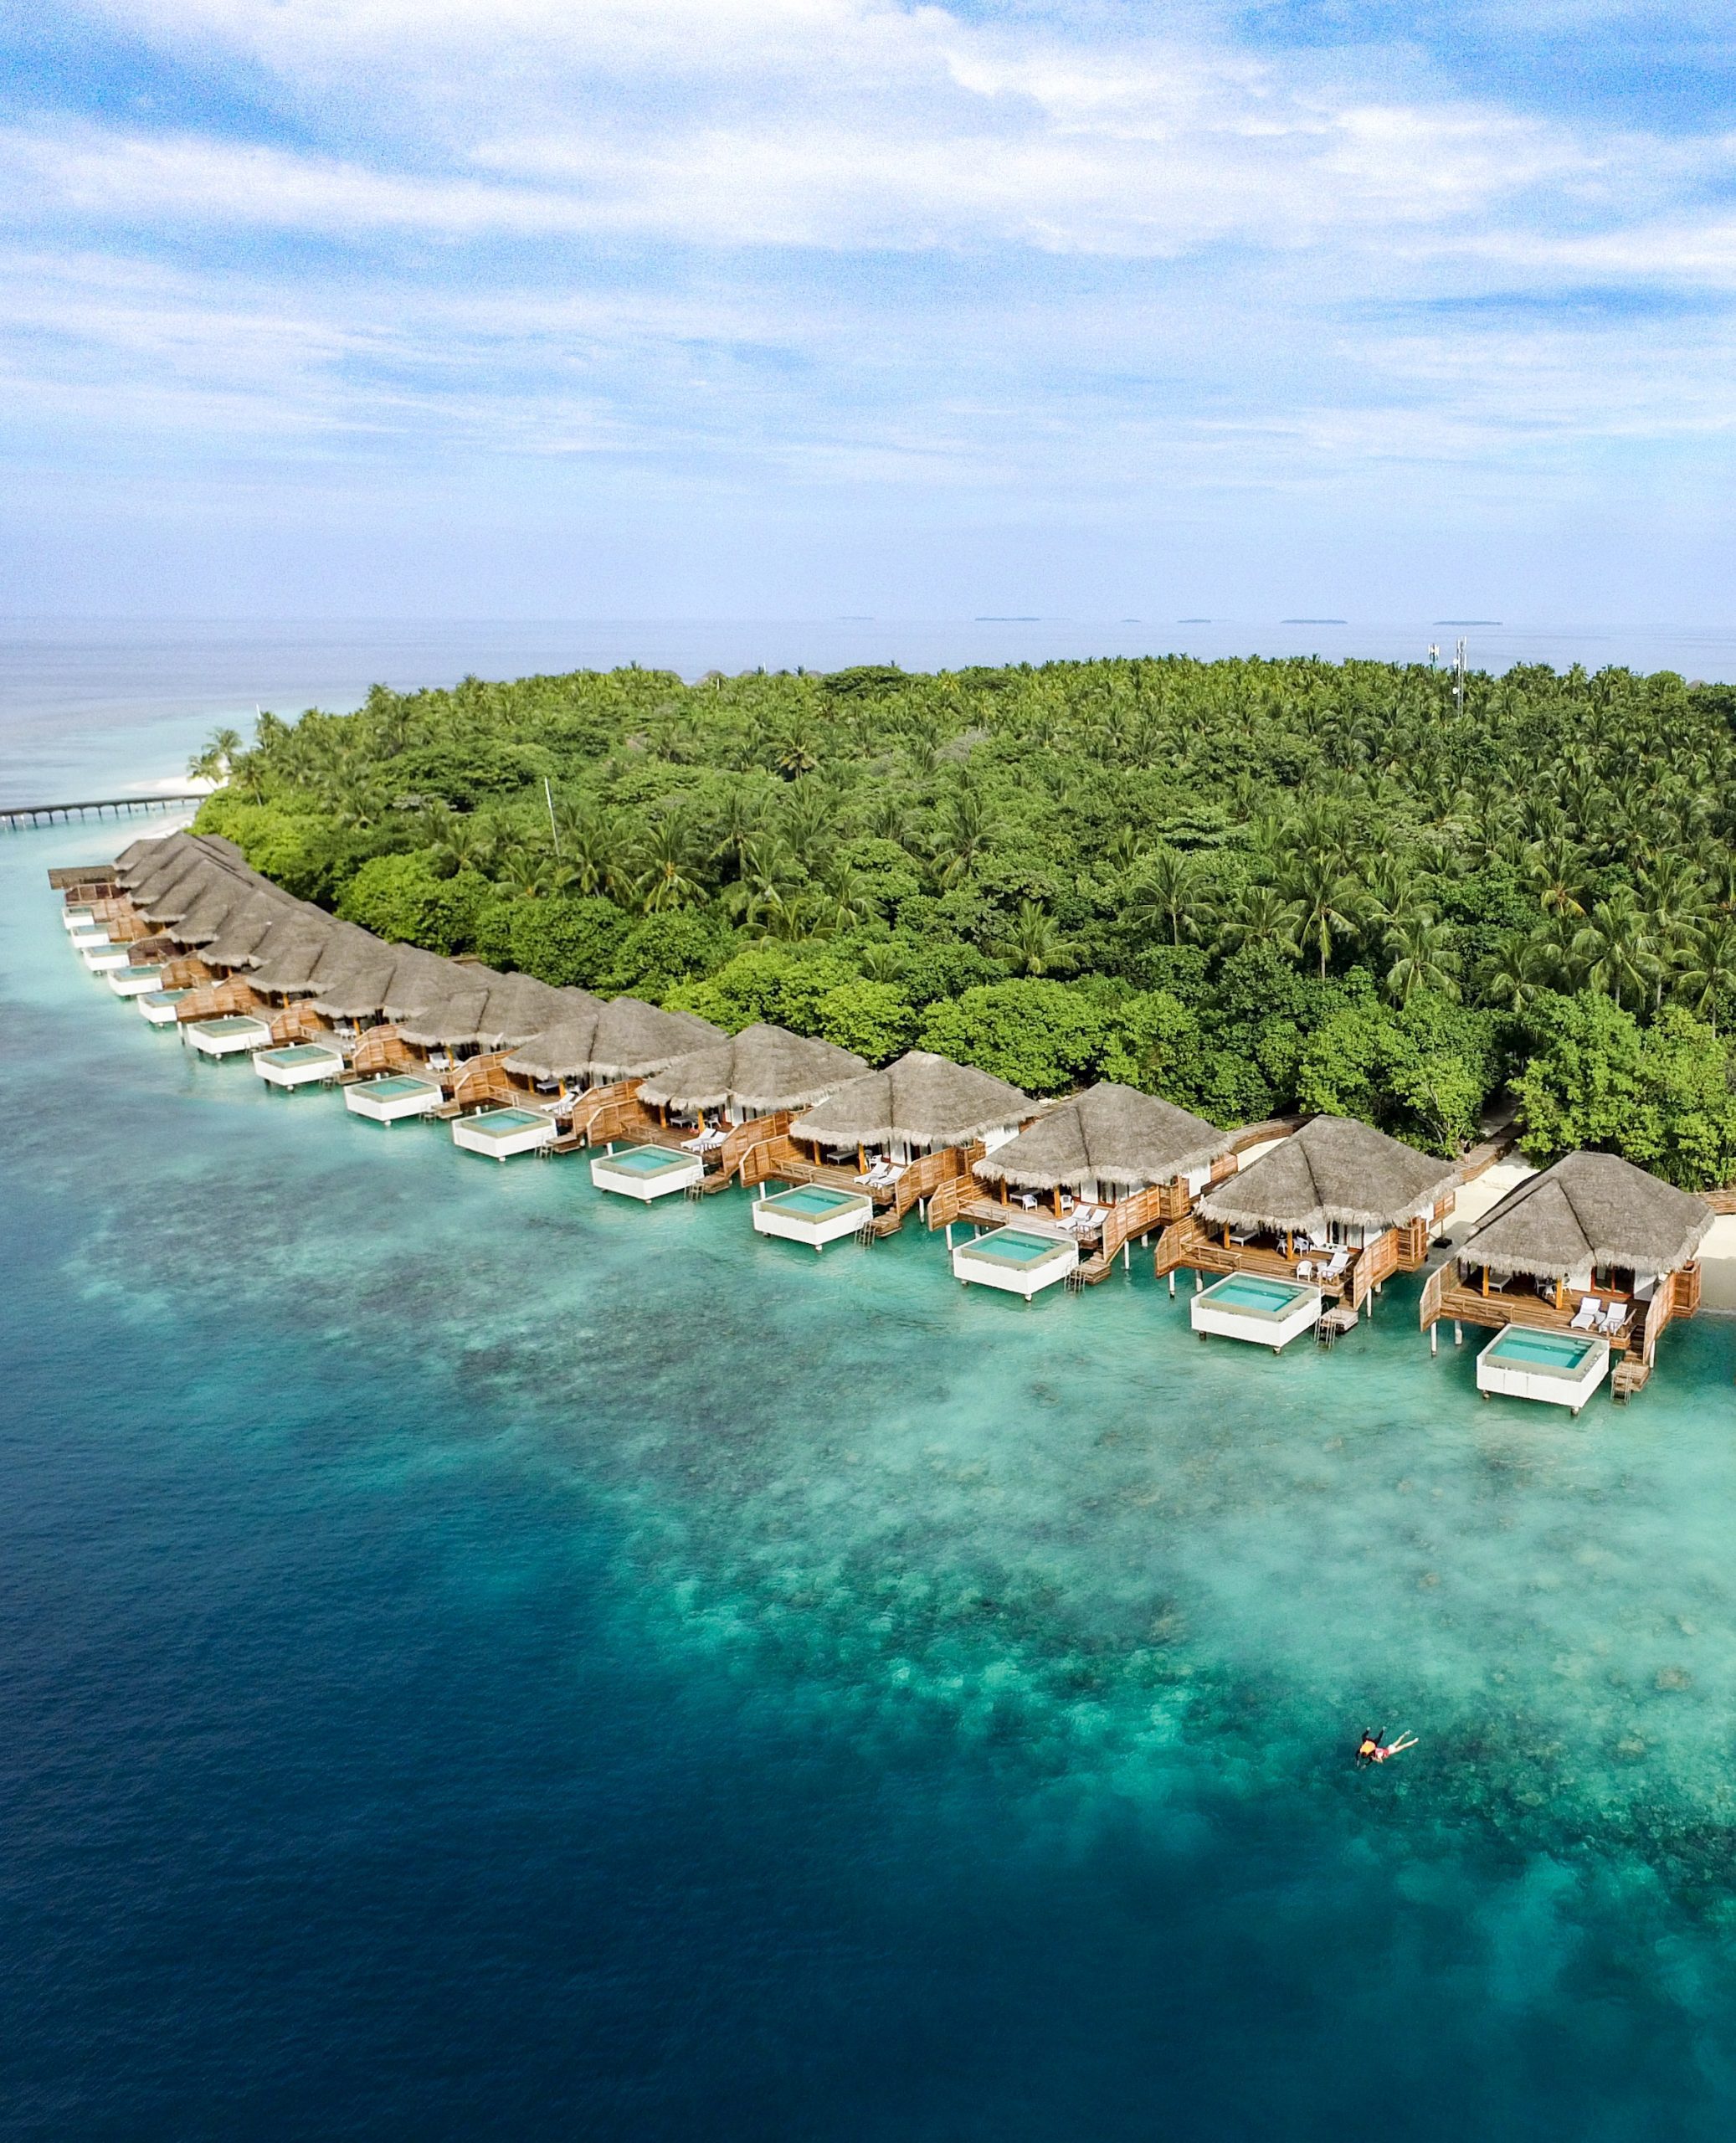 Dusit Thani Maldives to reopen on 1 August 2020  with enhanced safety measures, new guest experiences, and a luxurious all-inclusive package